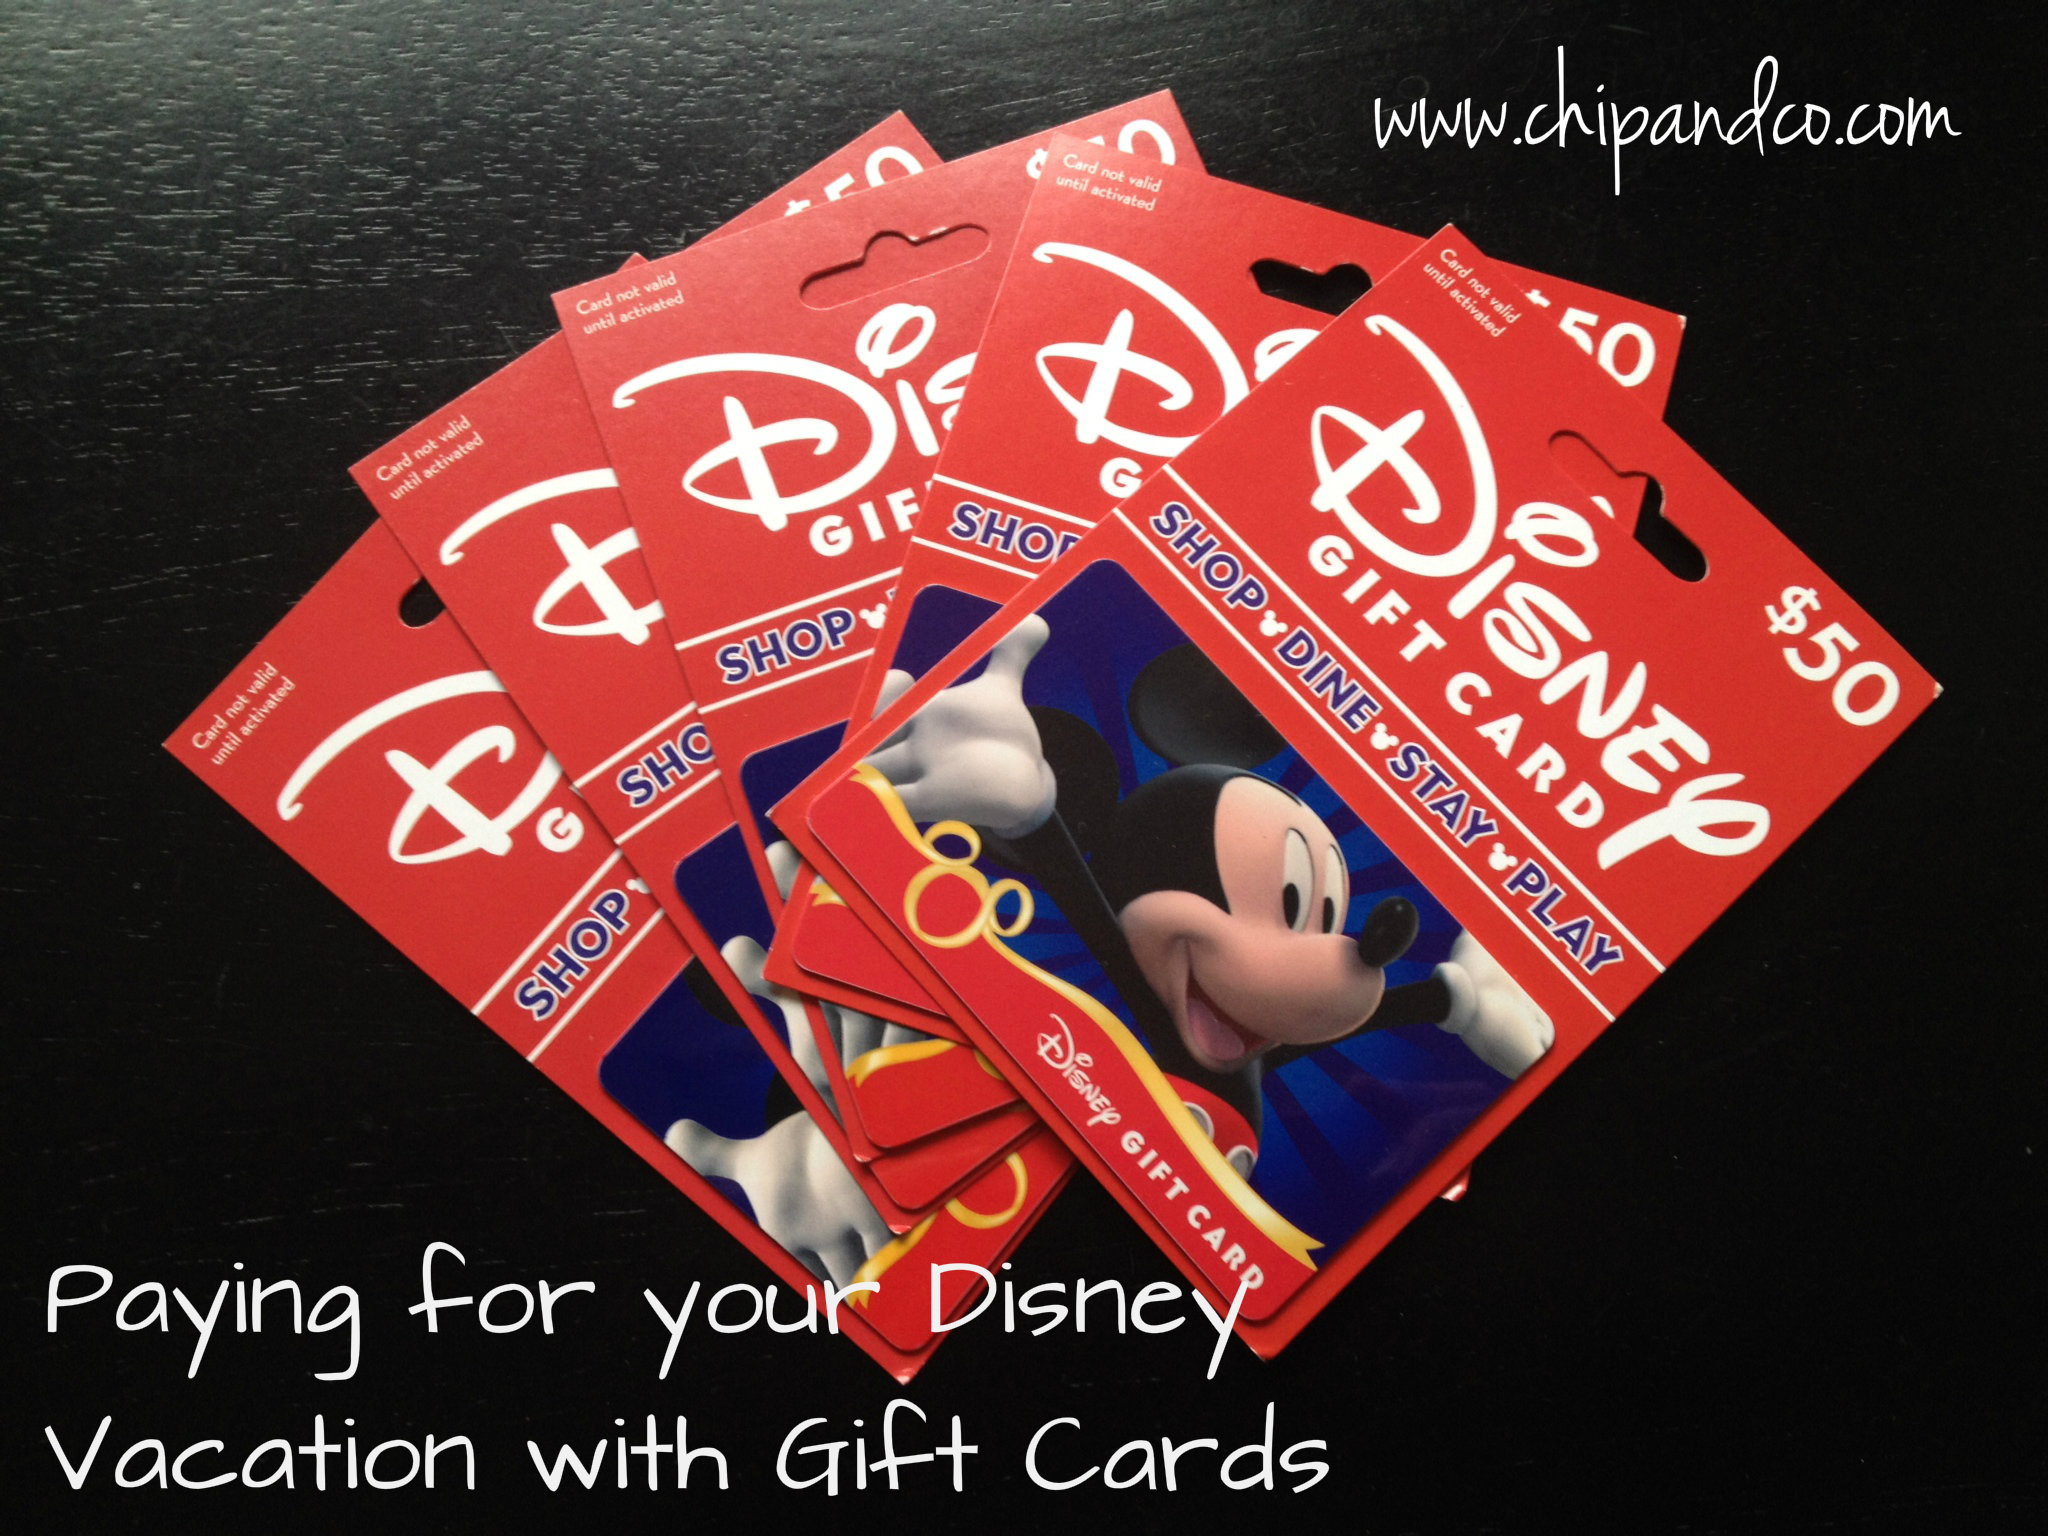 Paying for your Disney Reservation Using Disney Gift Cards